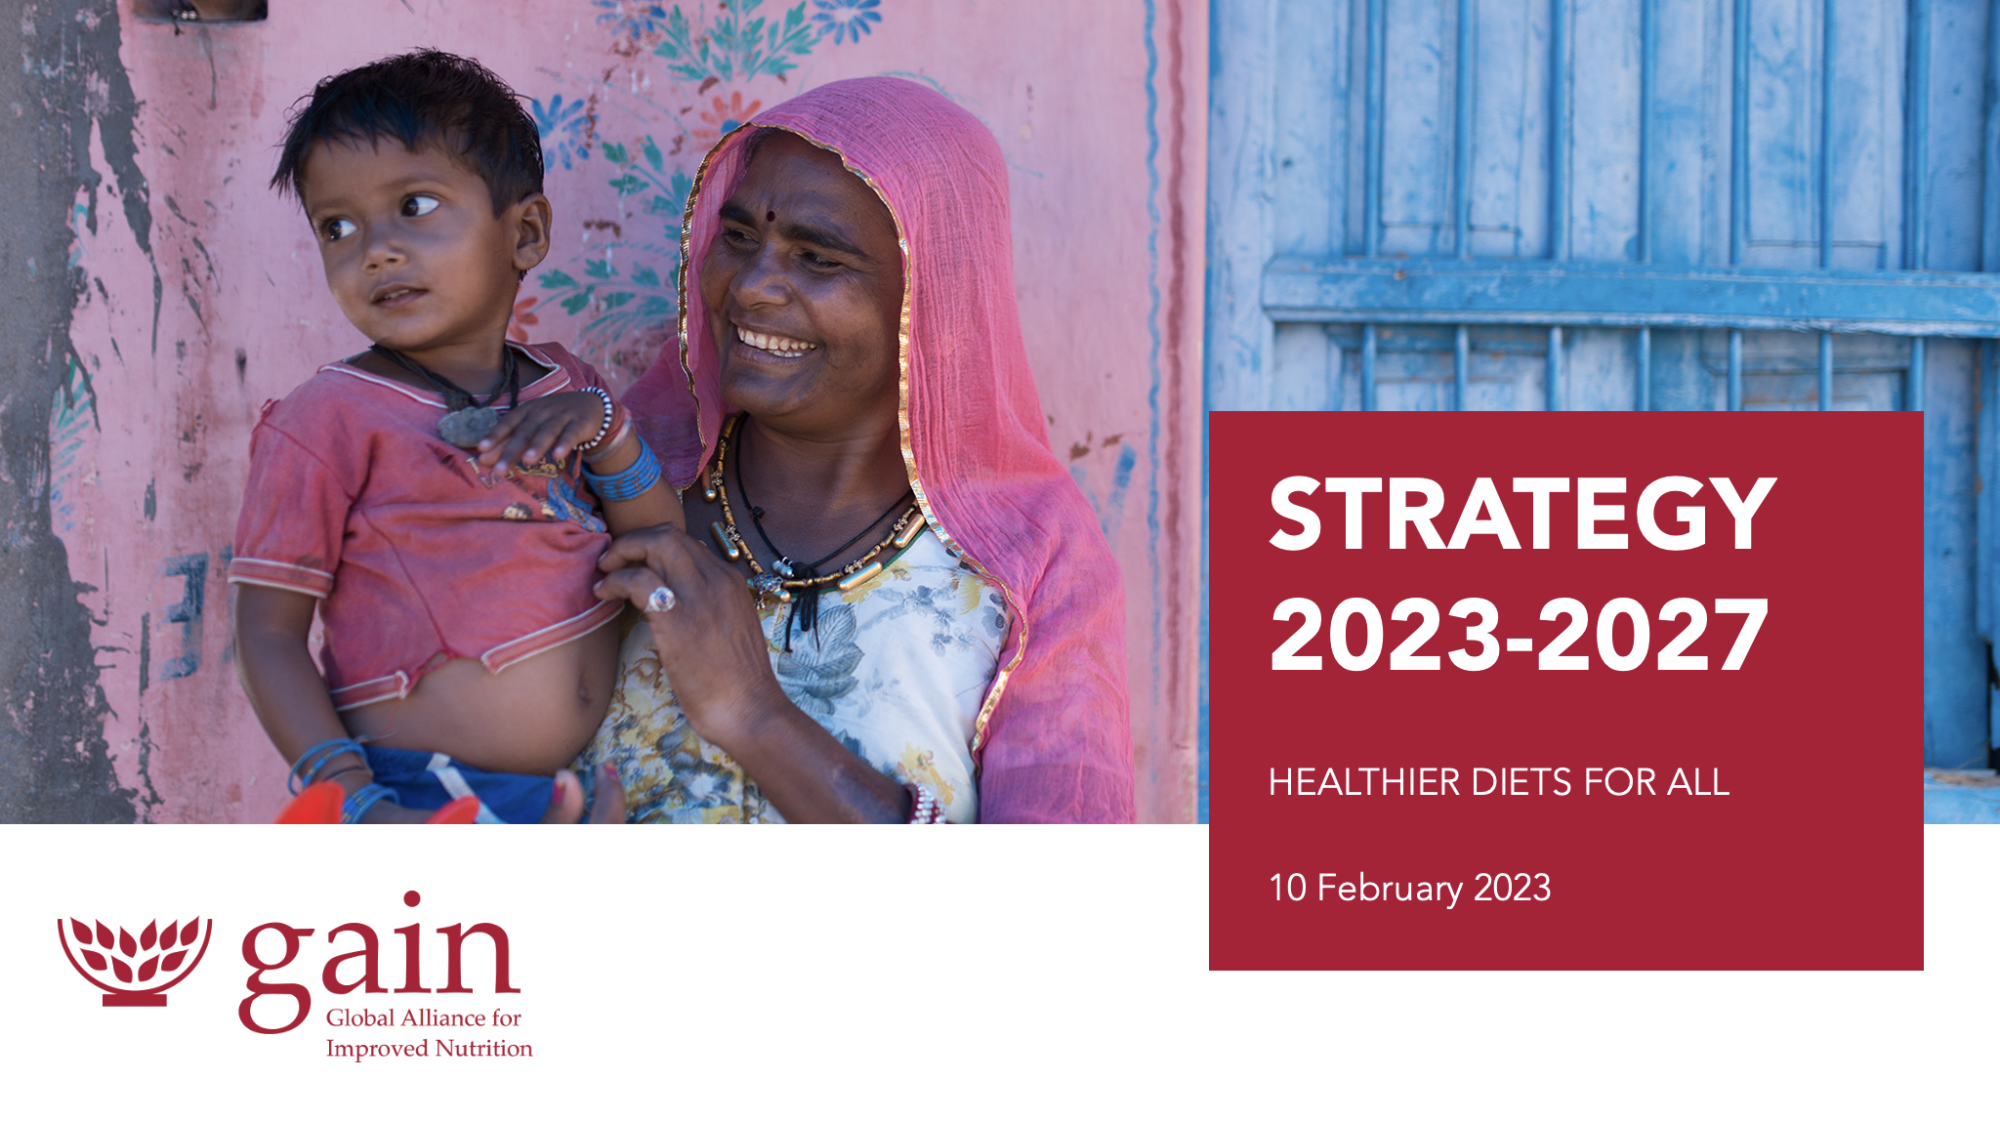 A woman in a pink veil smiles at her child, a blue due is behind them with the text "Strategy 2023-2027" and the GAIN logo